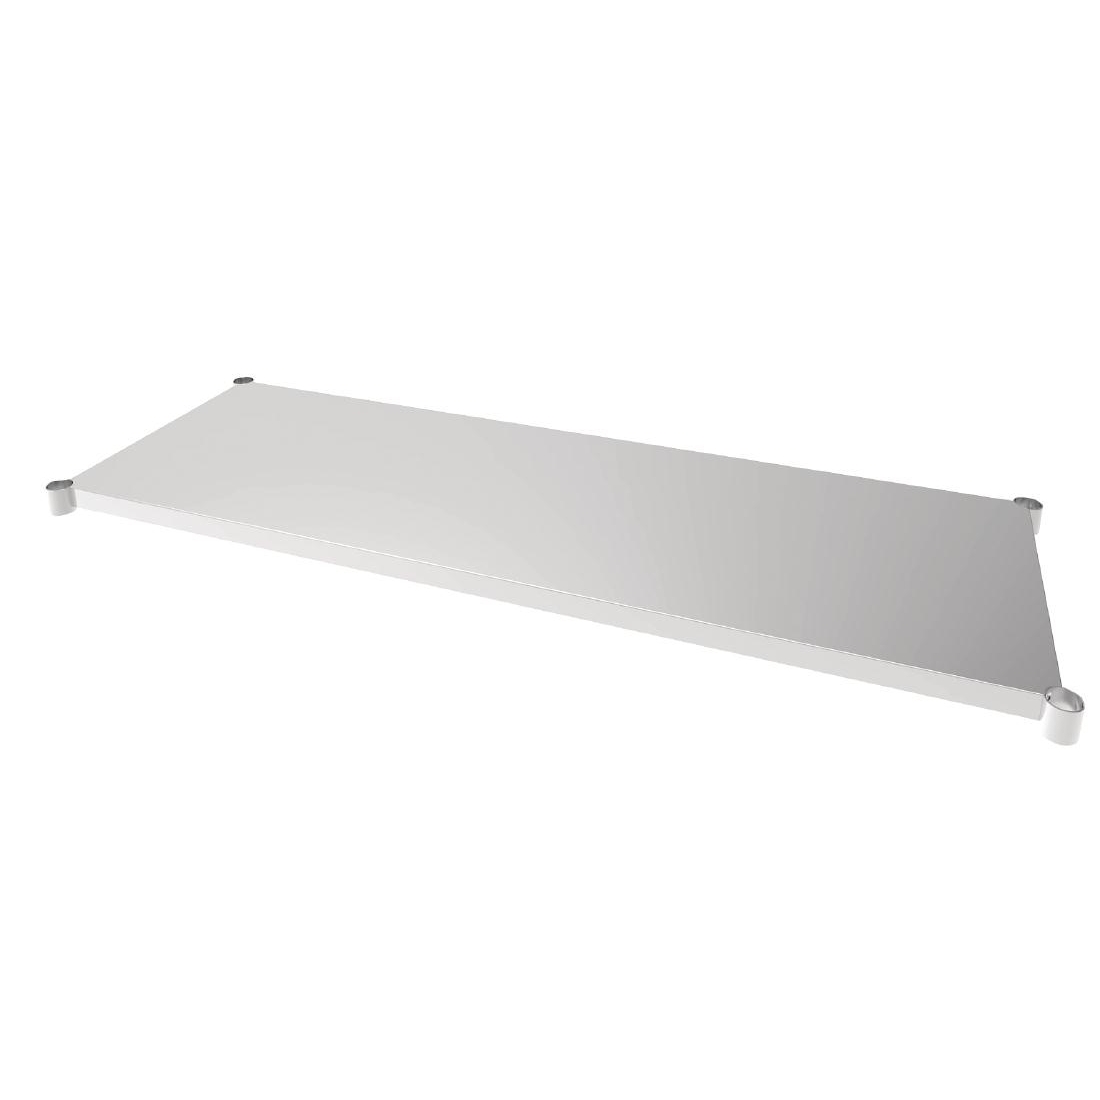 Vogue Stainless Steel Table Shelf 700x1800mm